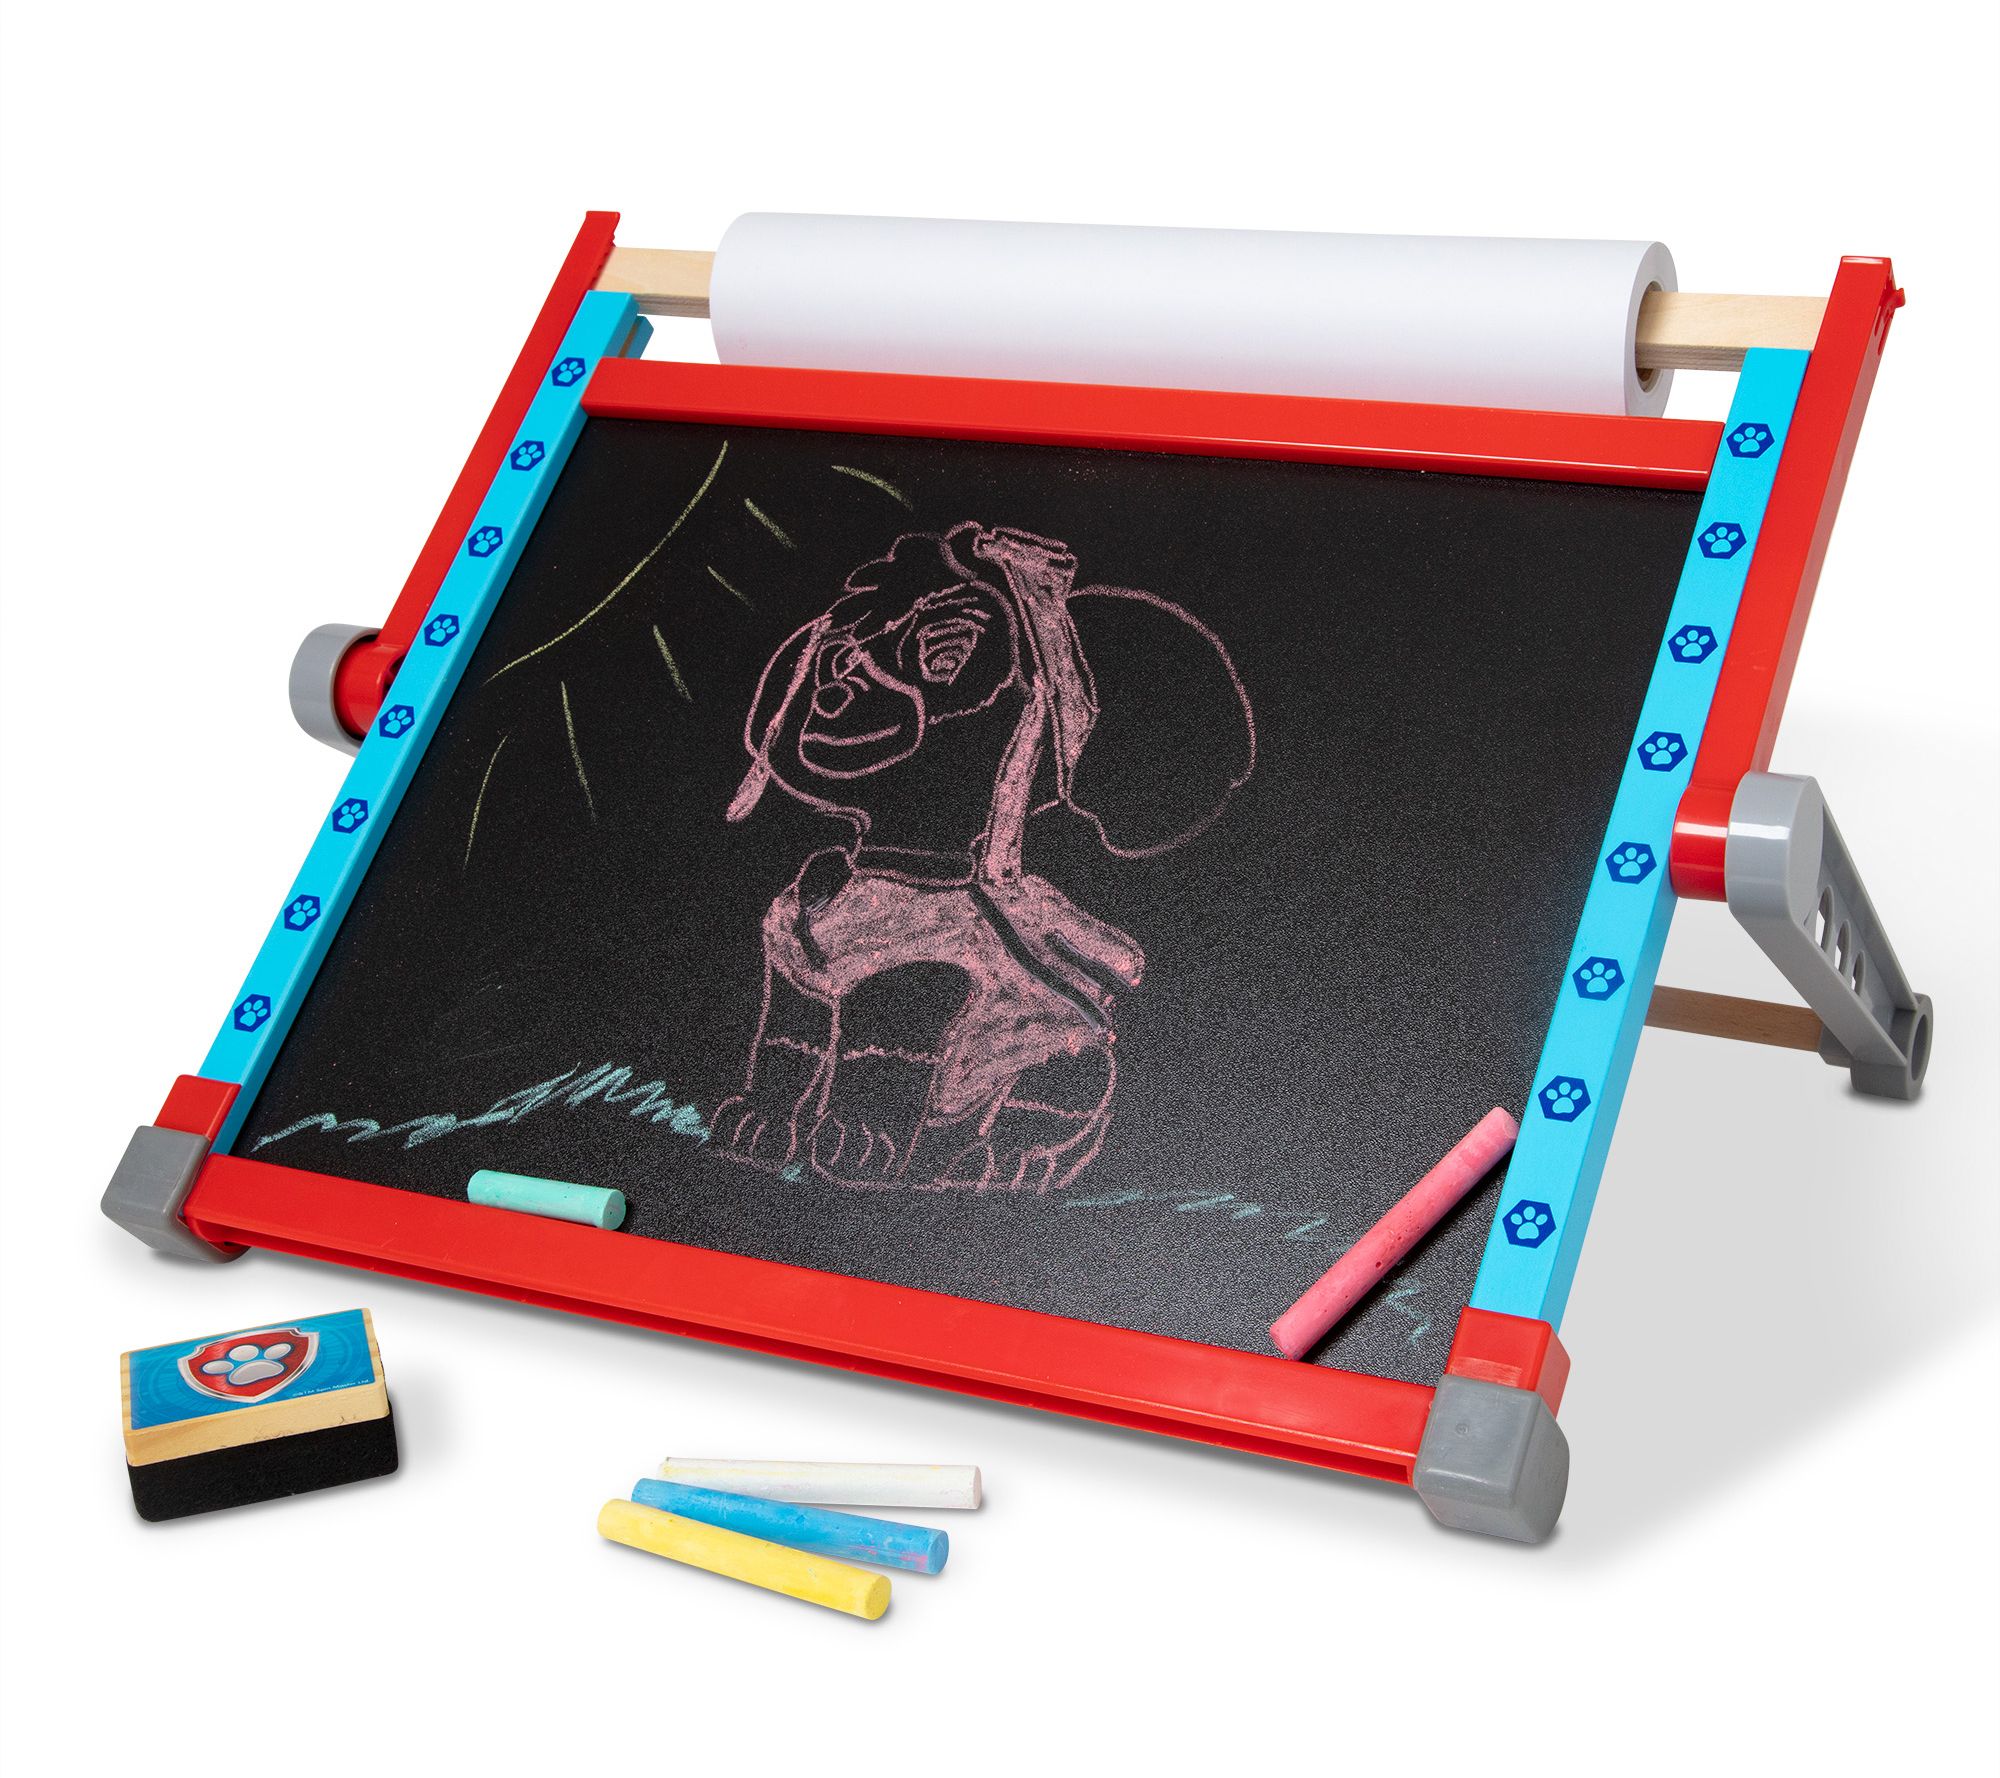 Cra-Z-Art 5-In-1 Portable Wooden Tabletop Art Easel With